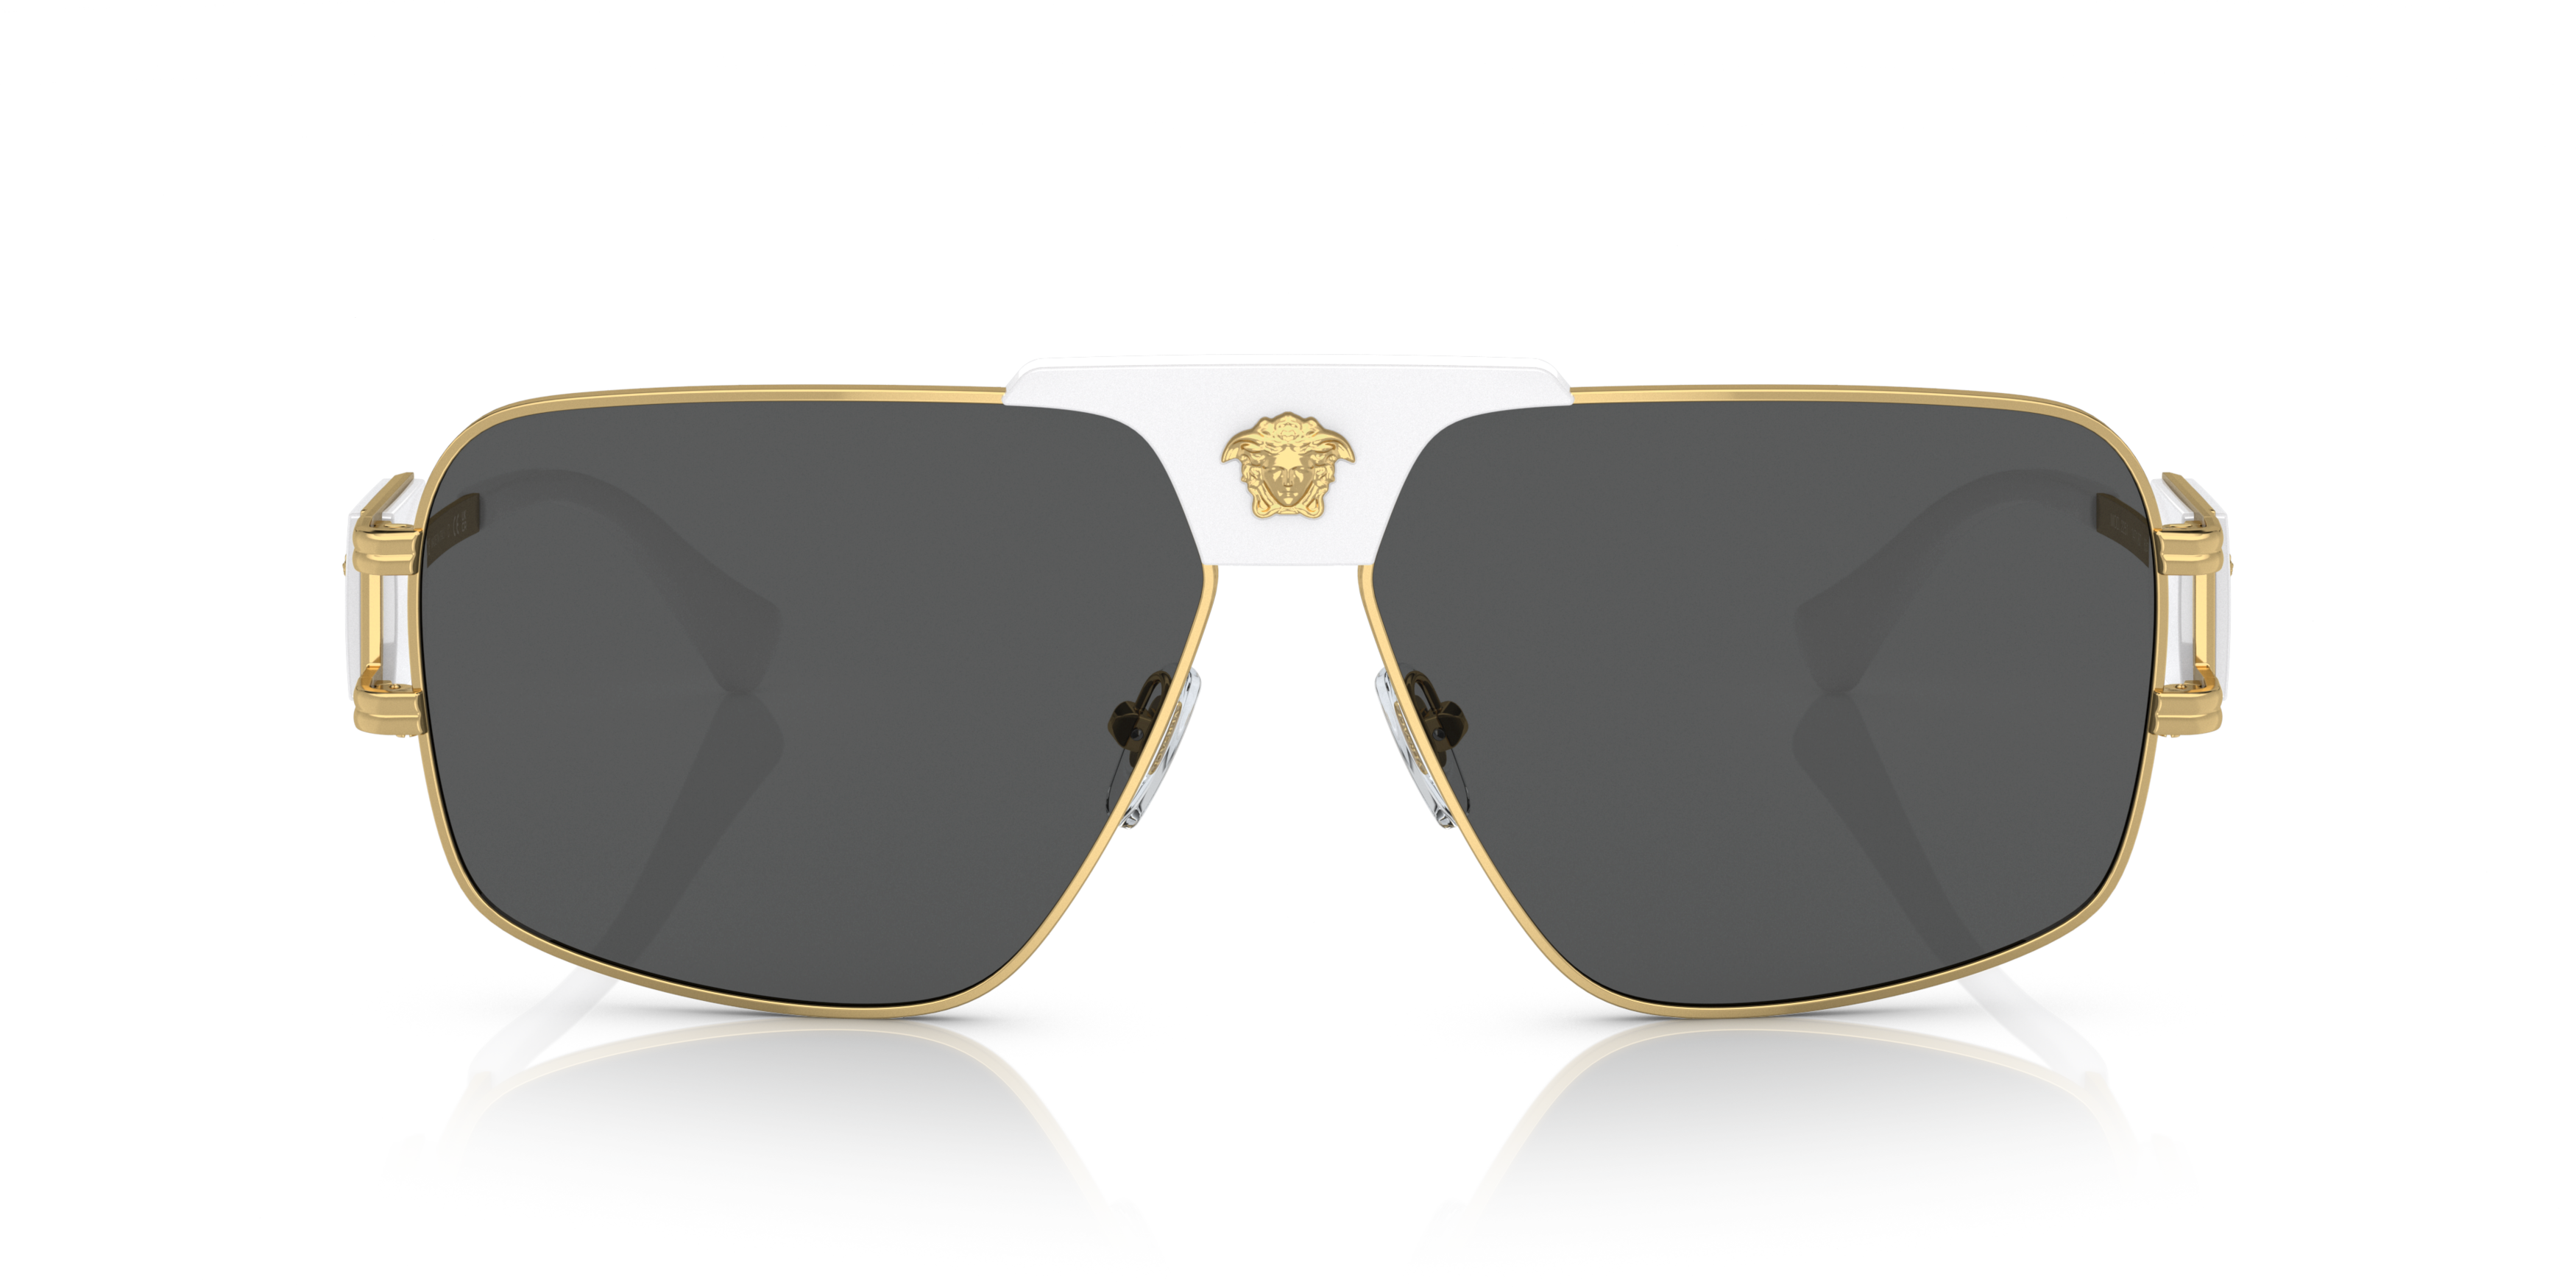 [products.image.front] Versace VE2251 147187